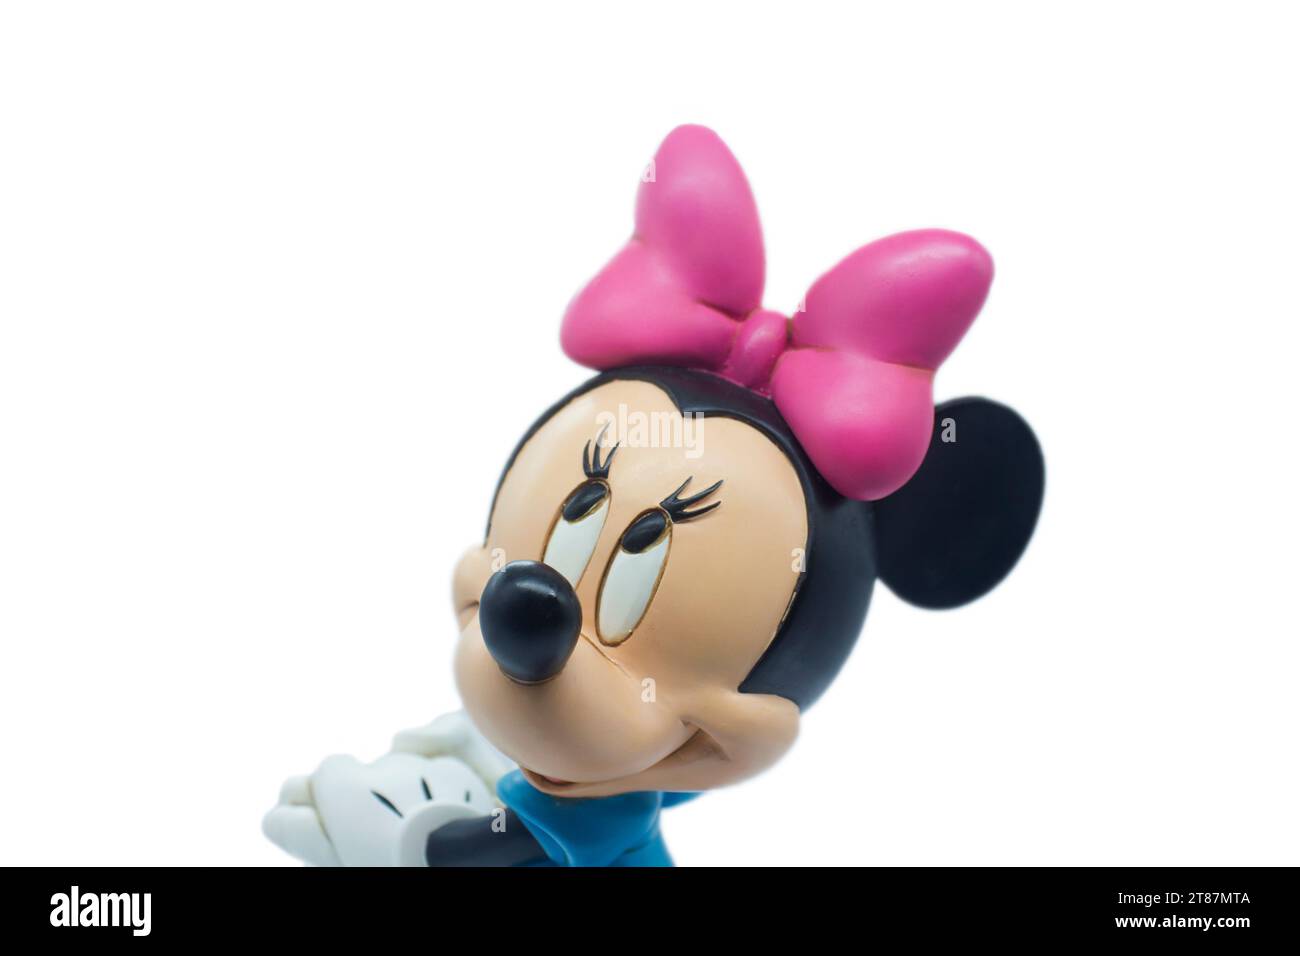 Studio image of Minnie Mouse on a white isolated background. Stock Photo